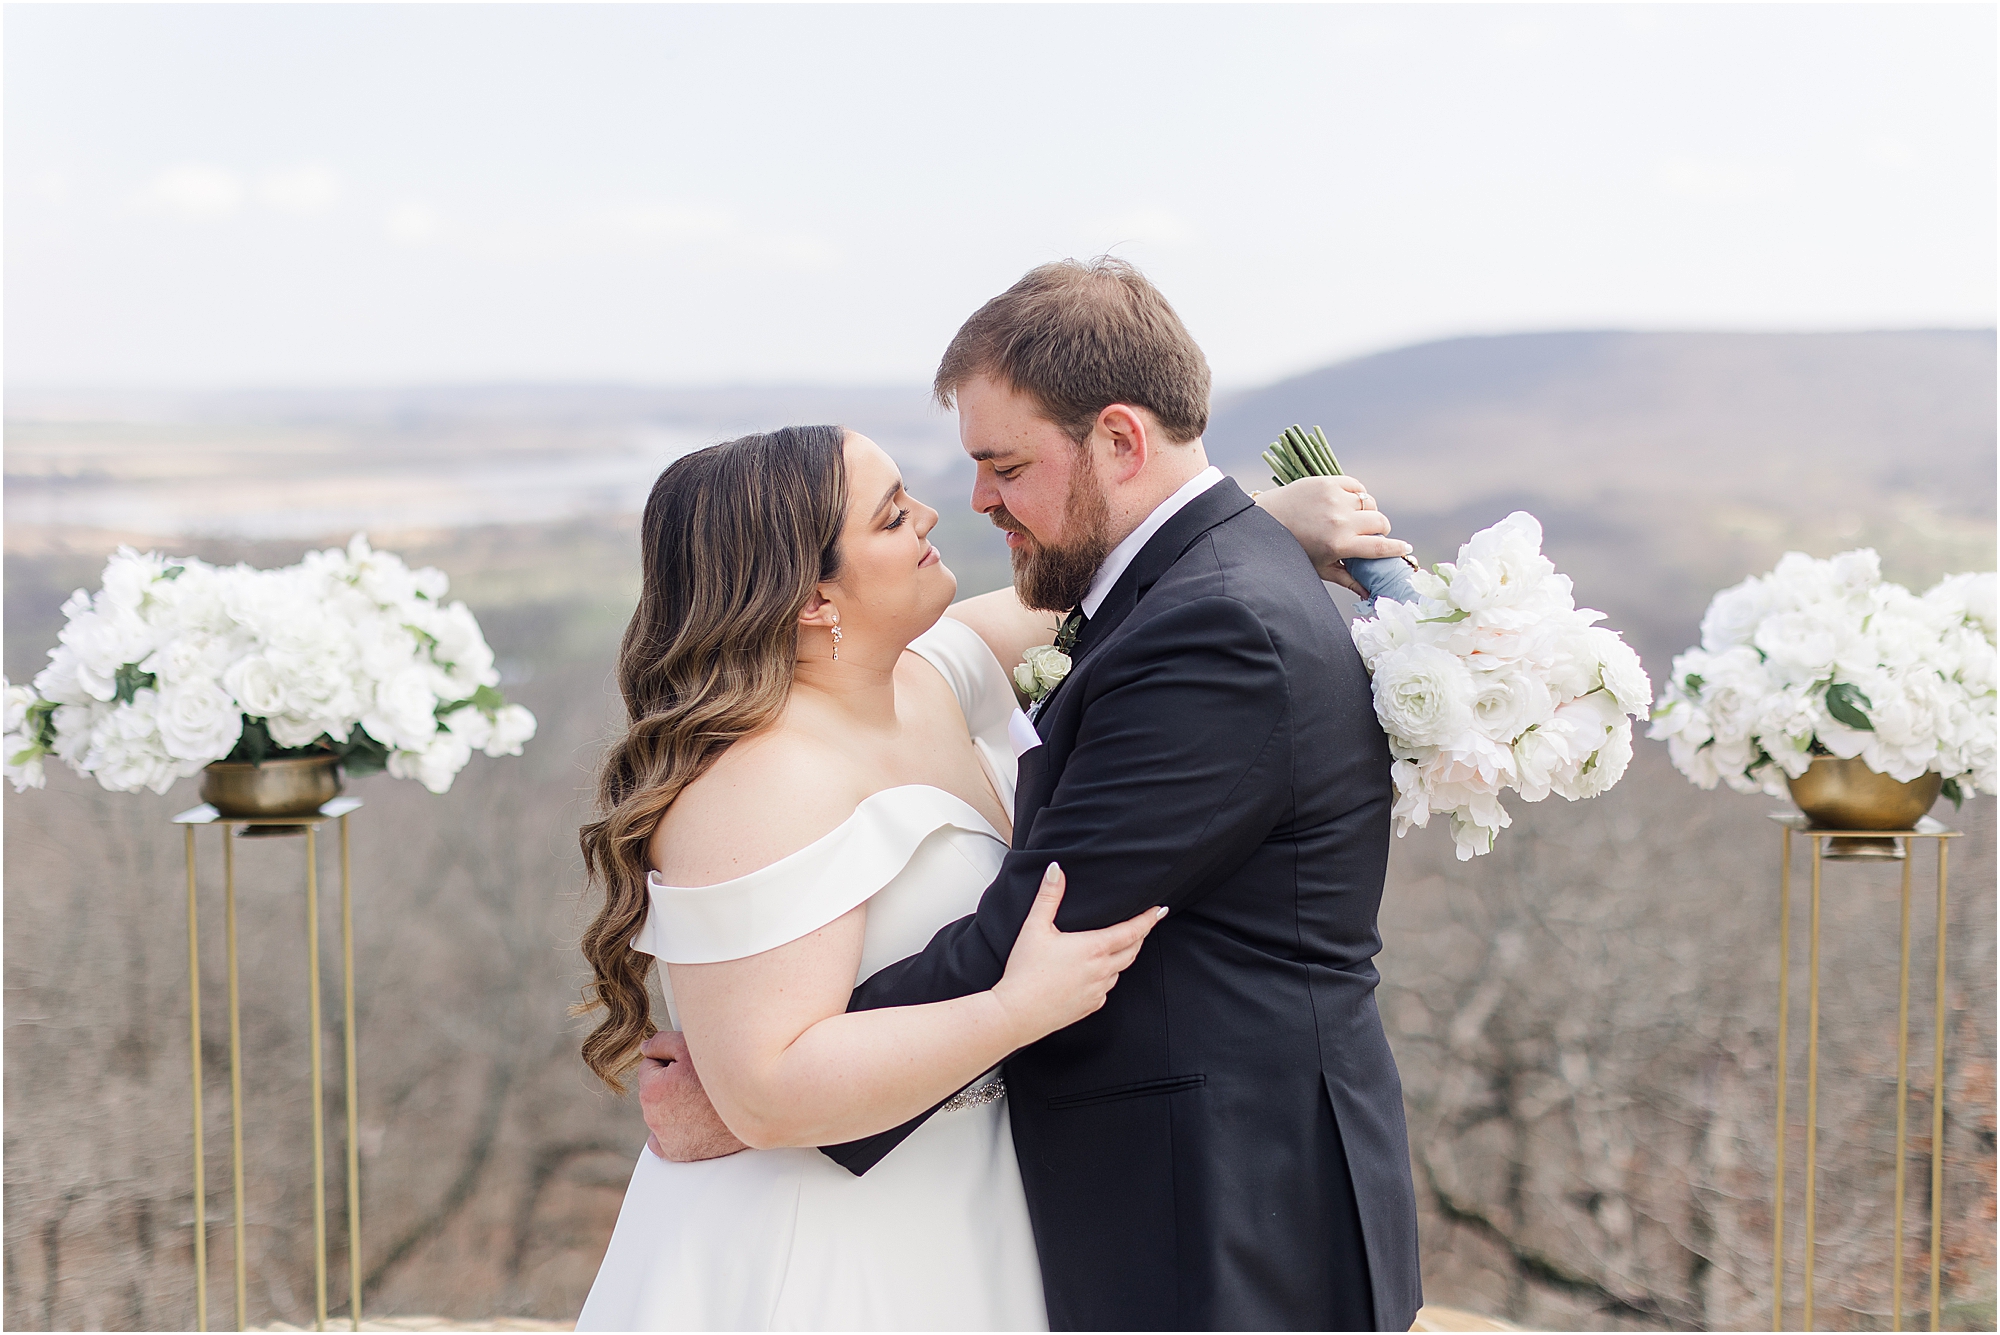 Brandi and Wade embracing at their Dream Point Ranch Wedding at the ledge of a valley view. 